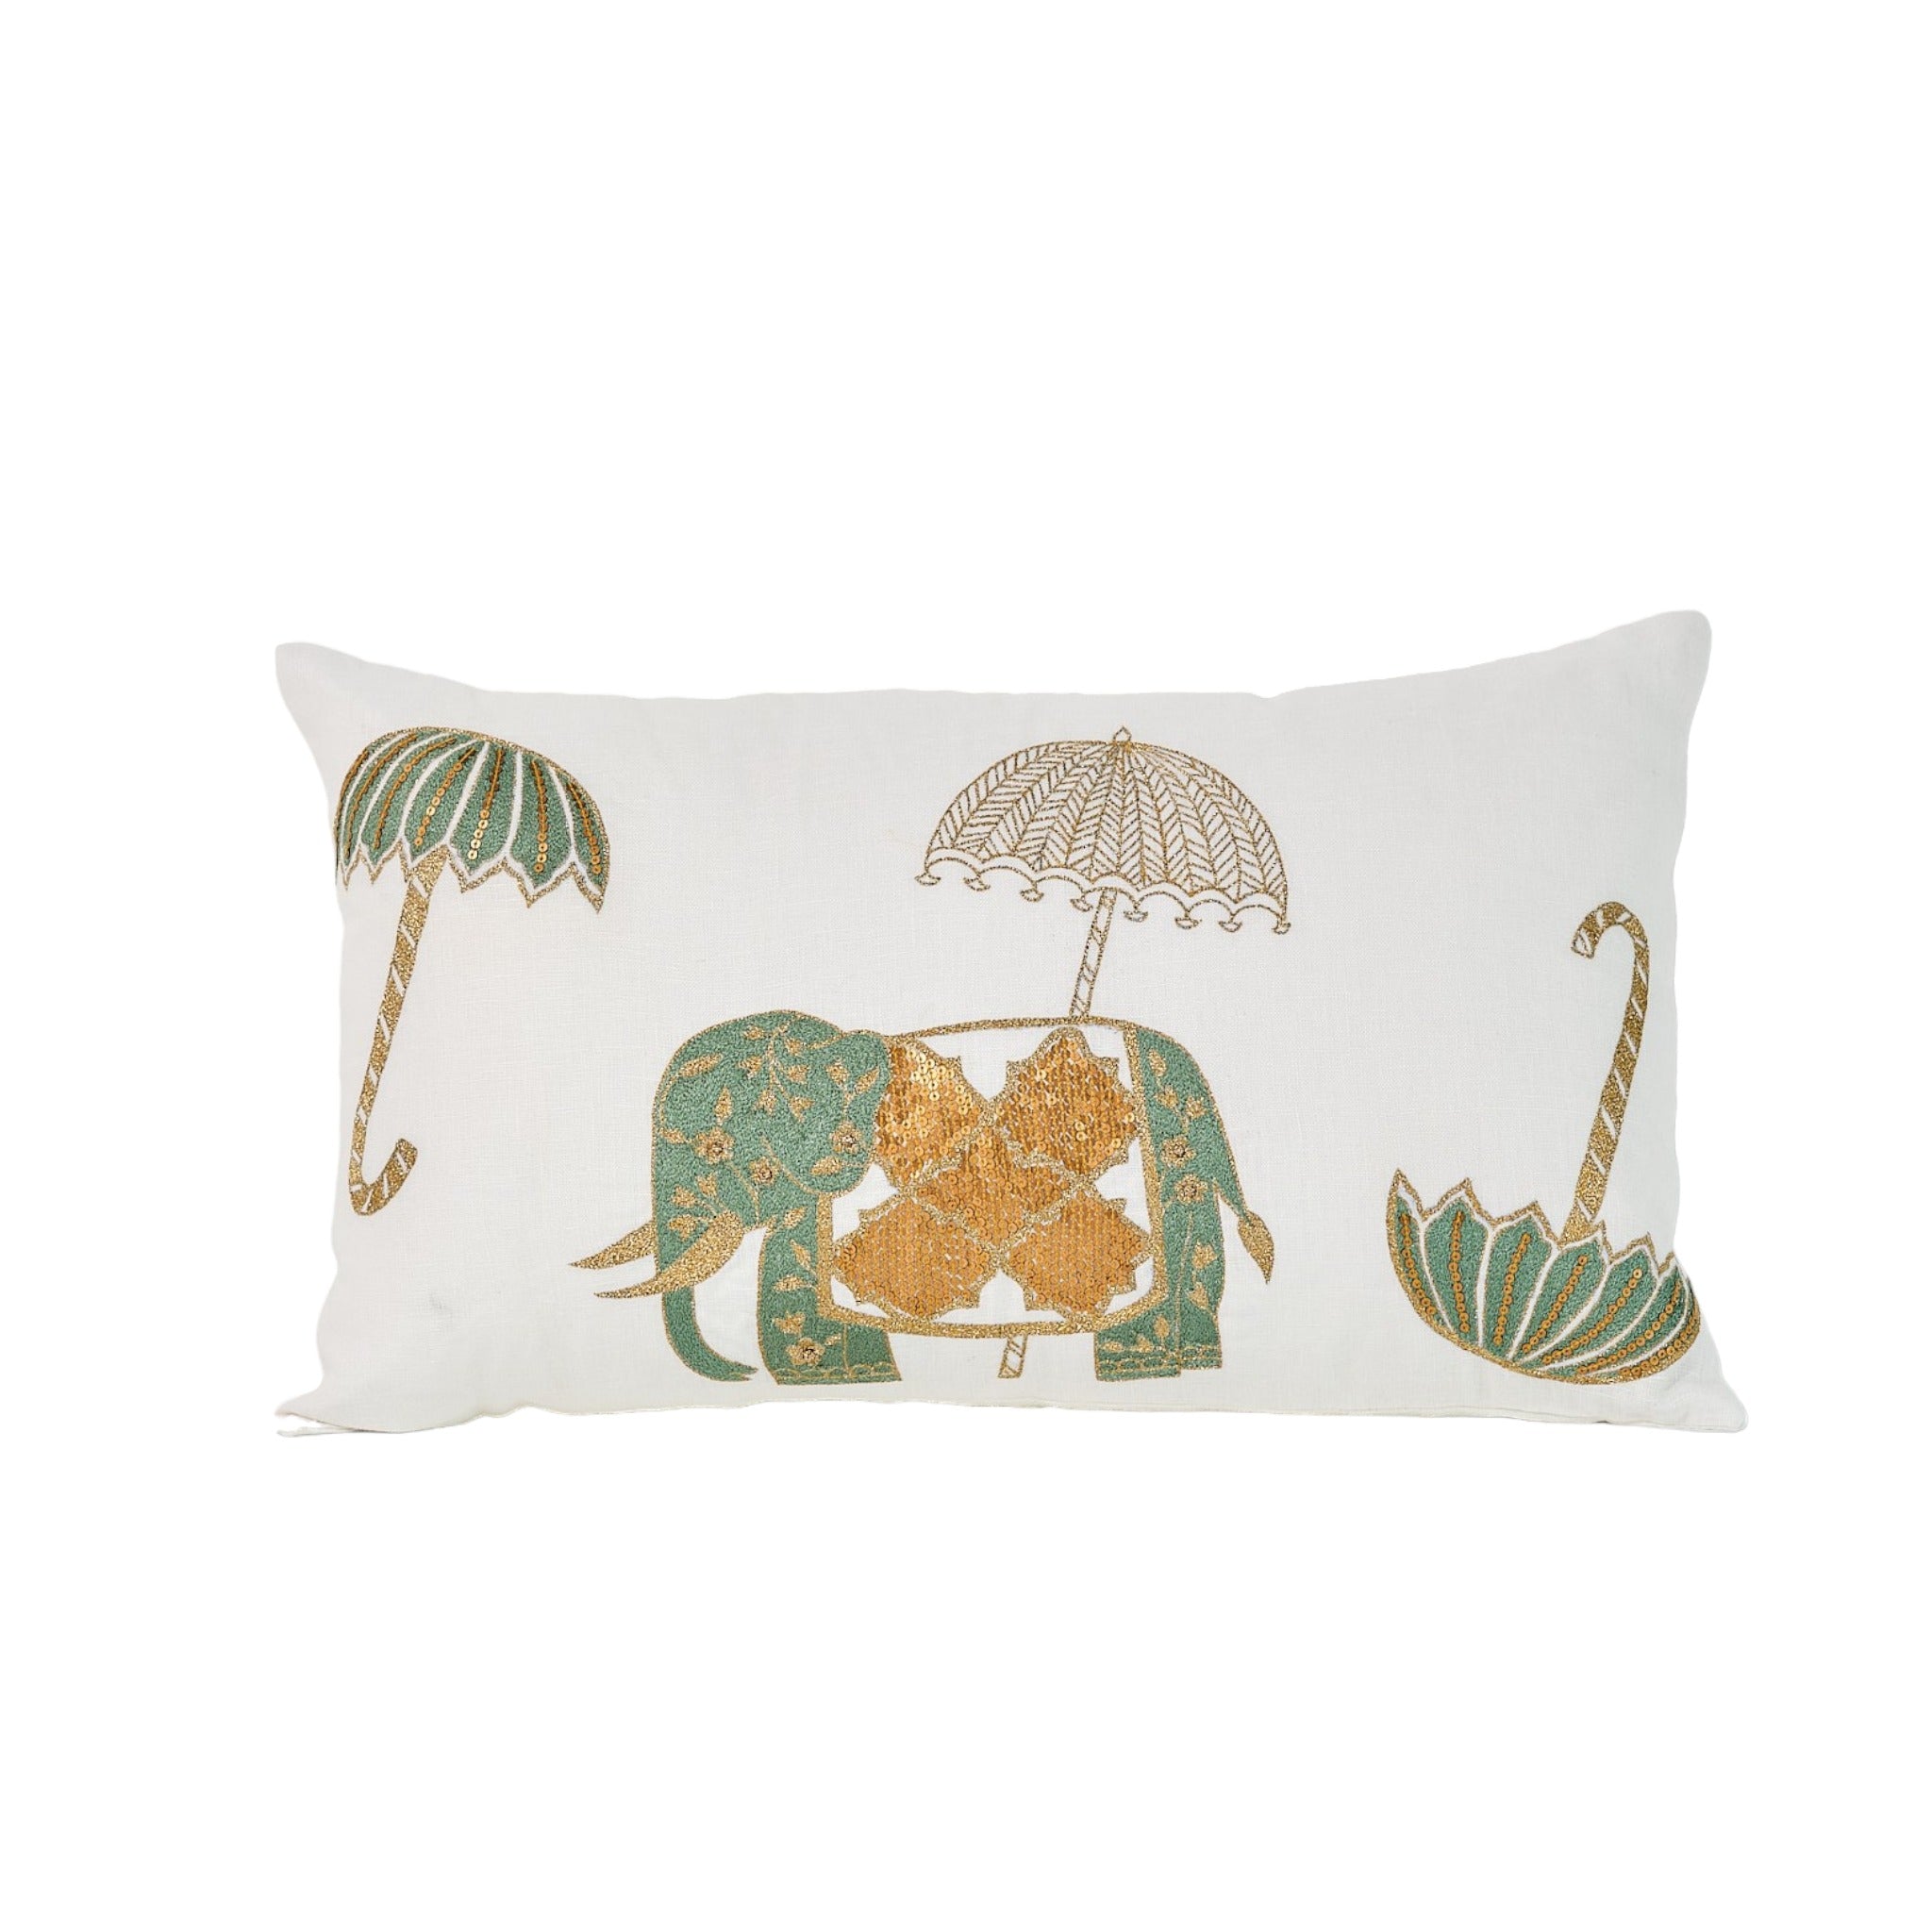 elephant and umbrella embroidered cushion cover 50x30cm